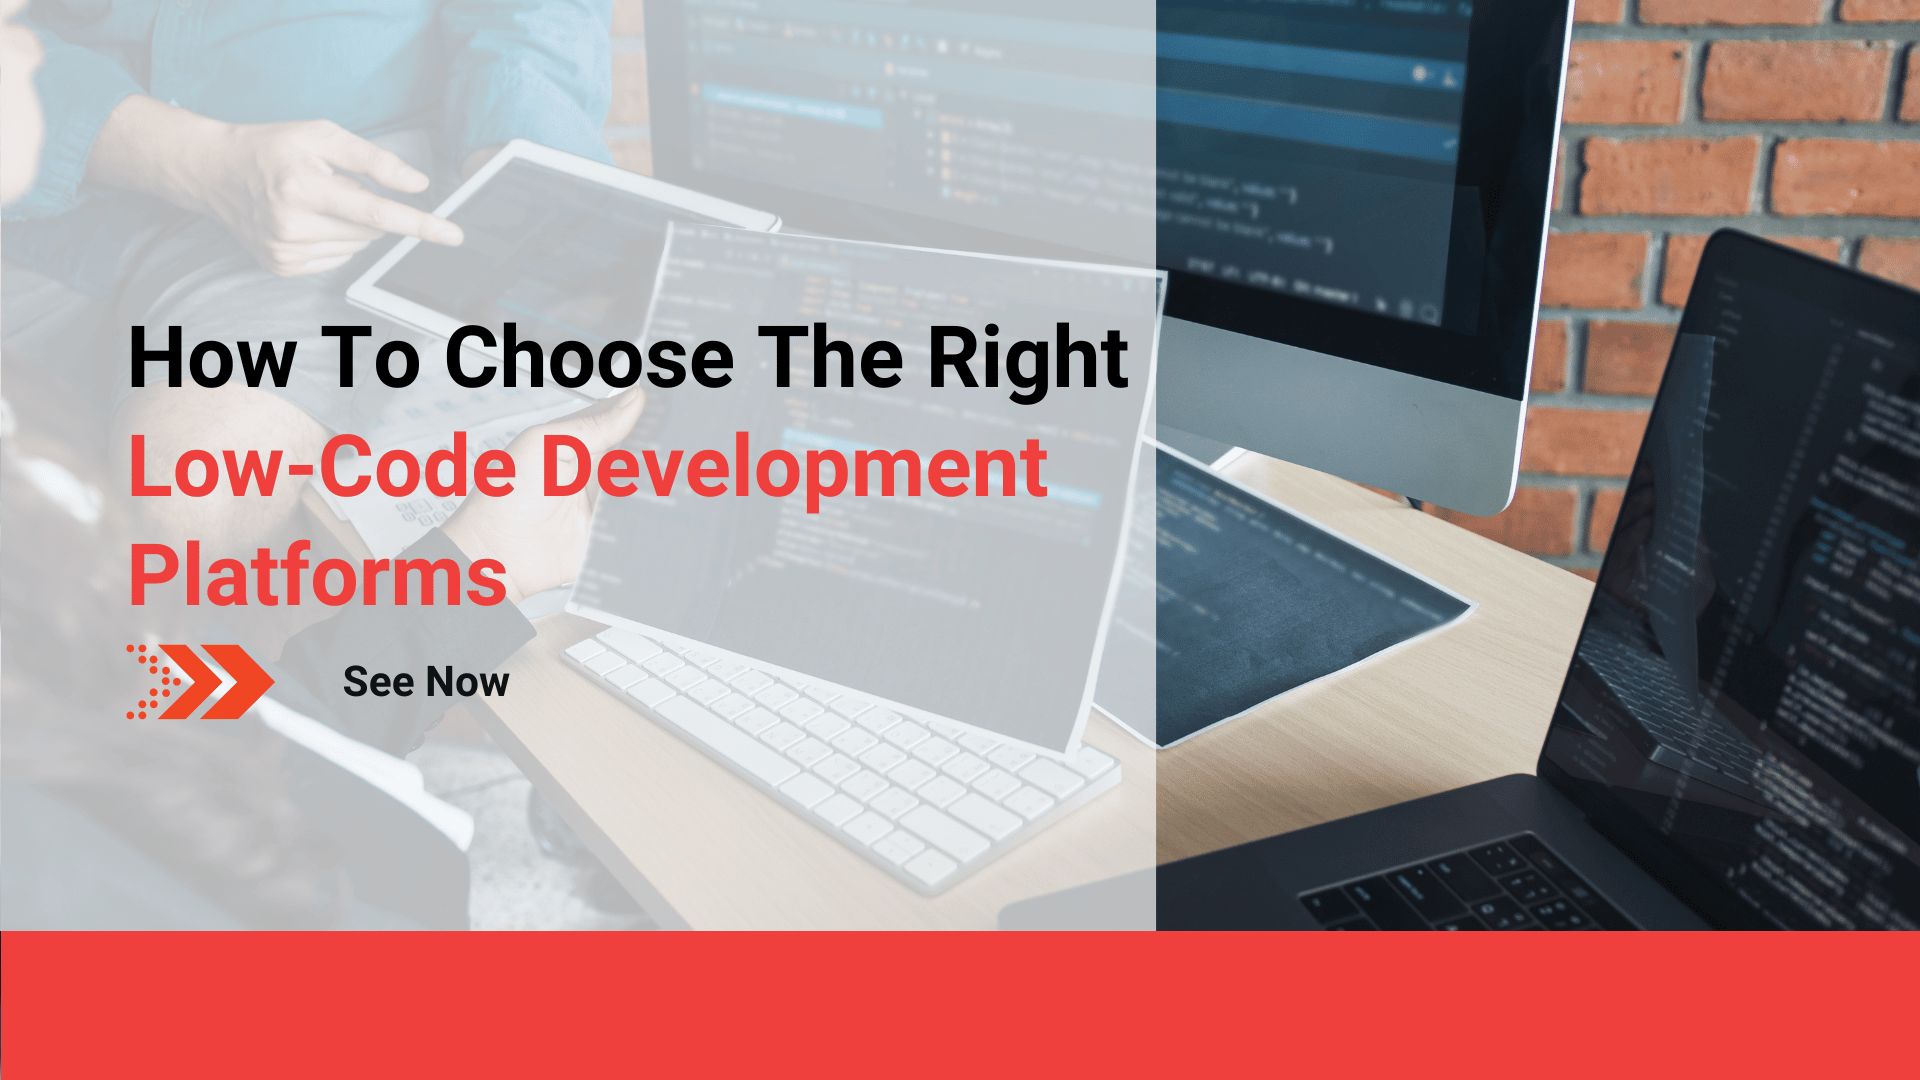 How to choose the right low-code development platforms